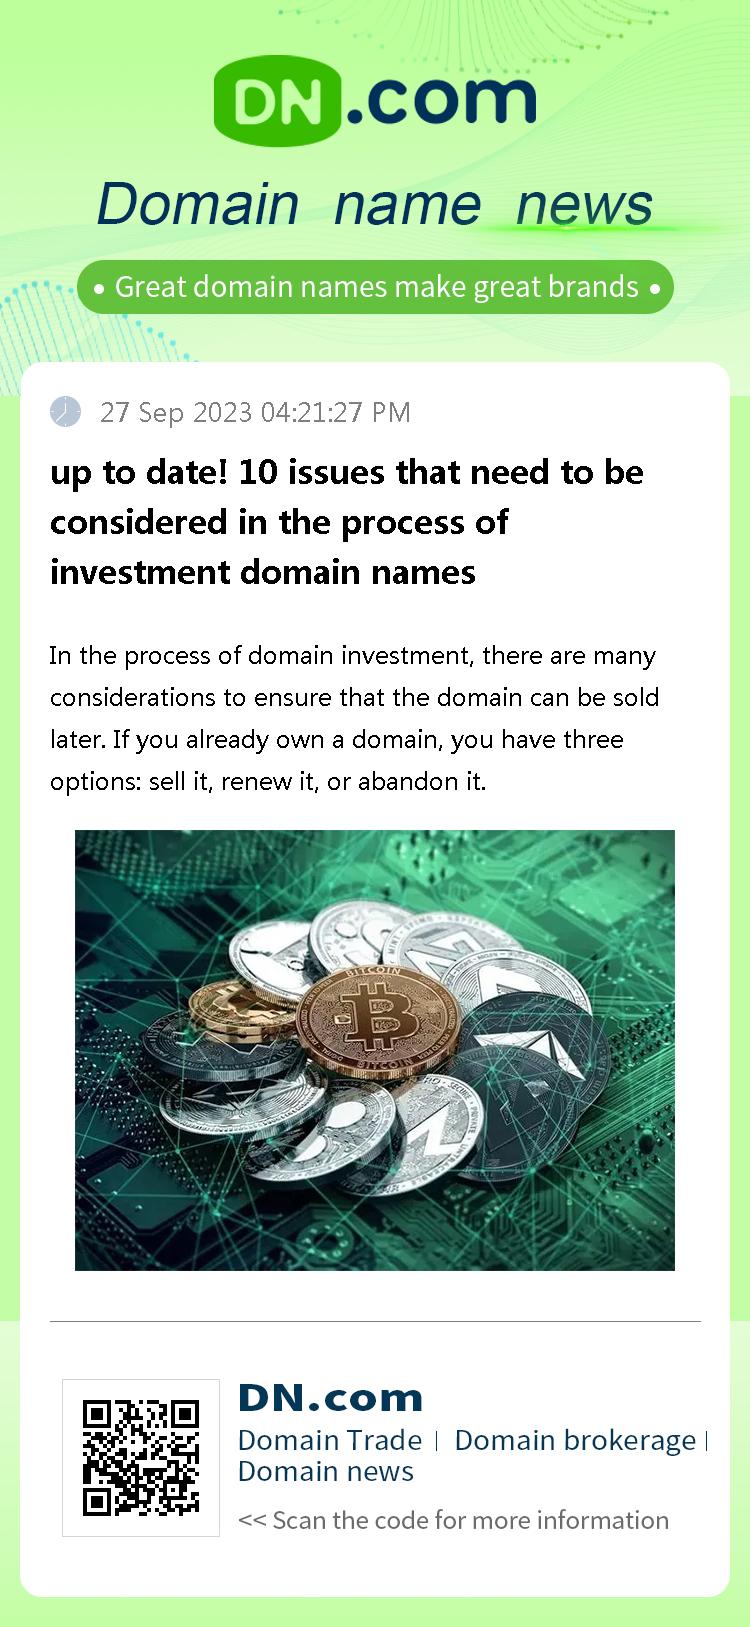 up to date! 10 issues that need to be considered in the process of investment domain names